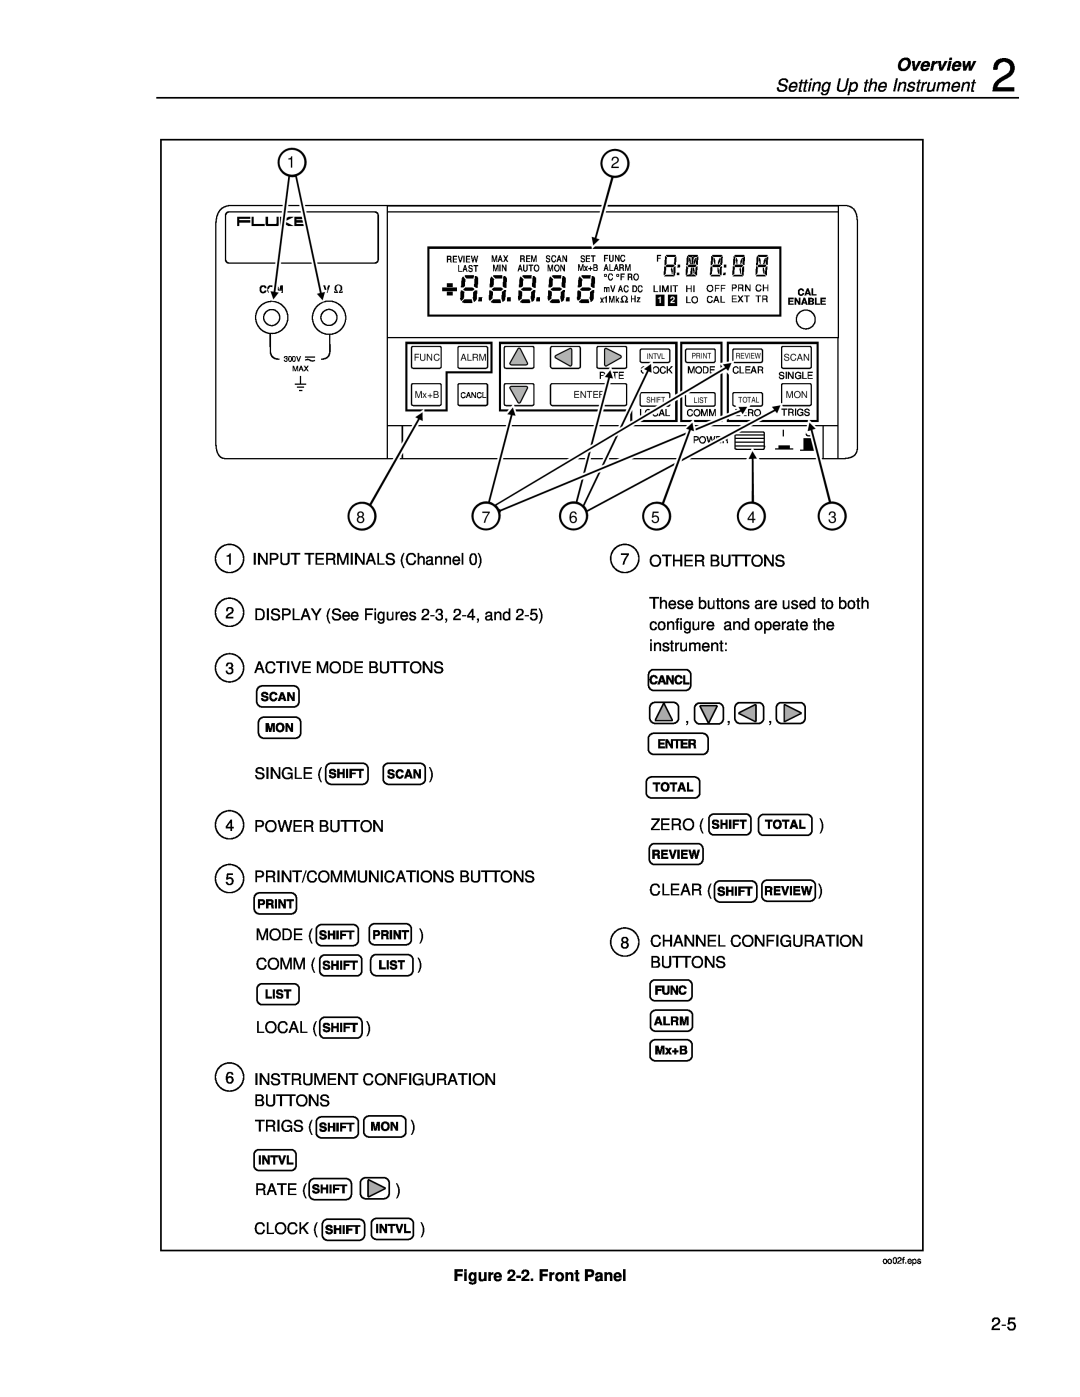 Fluke 2620A, 2625A user manual Overview, Setting Up the Instrument, 2. Front Panel 